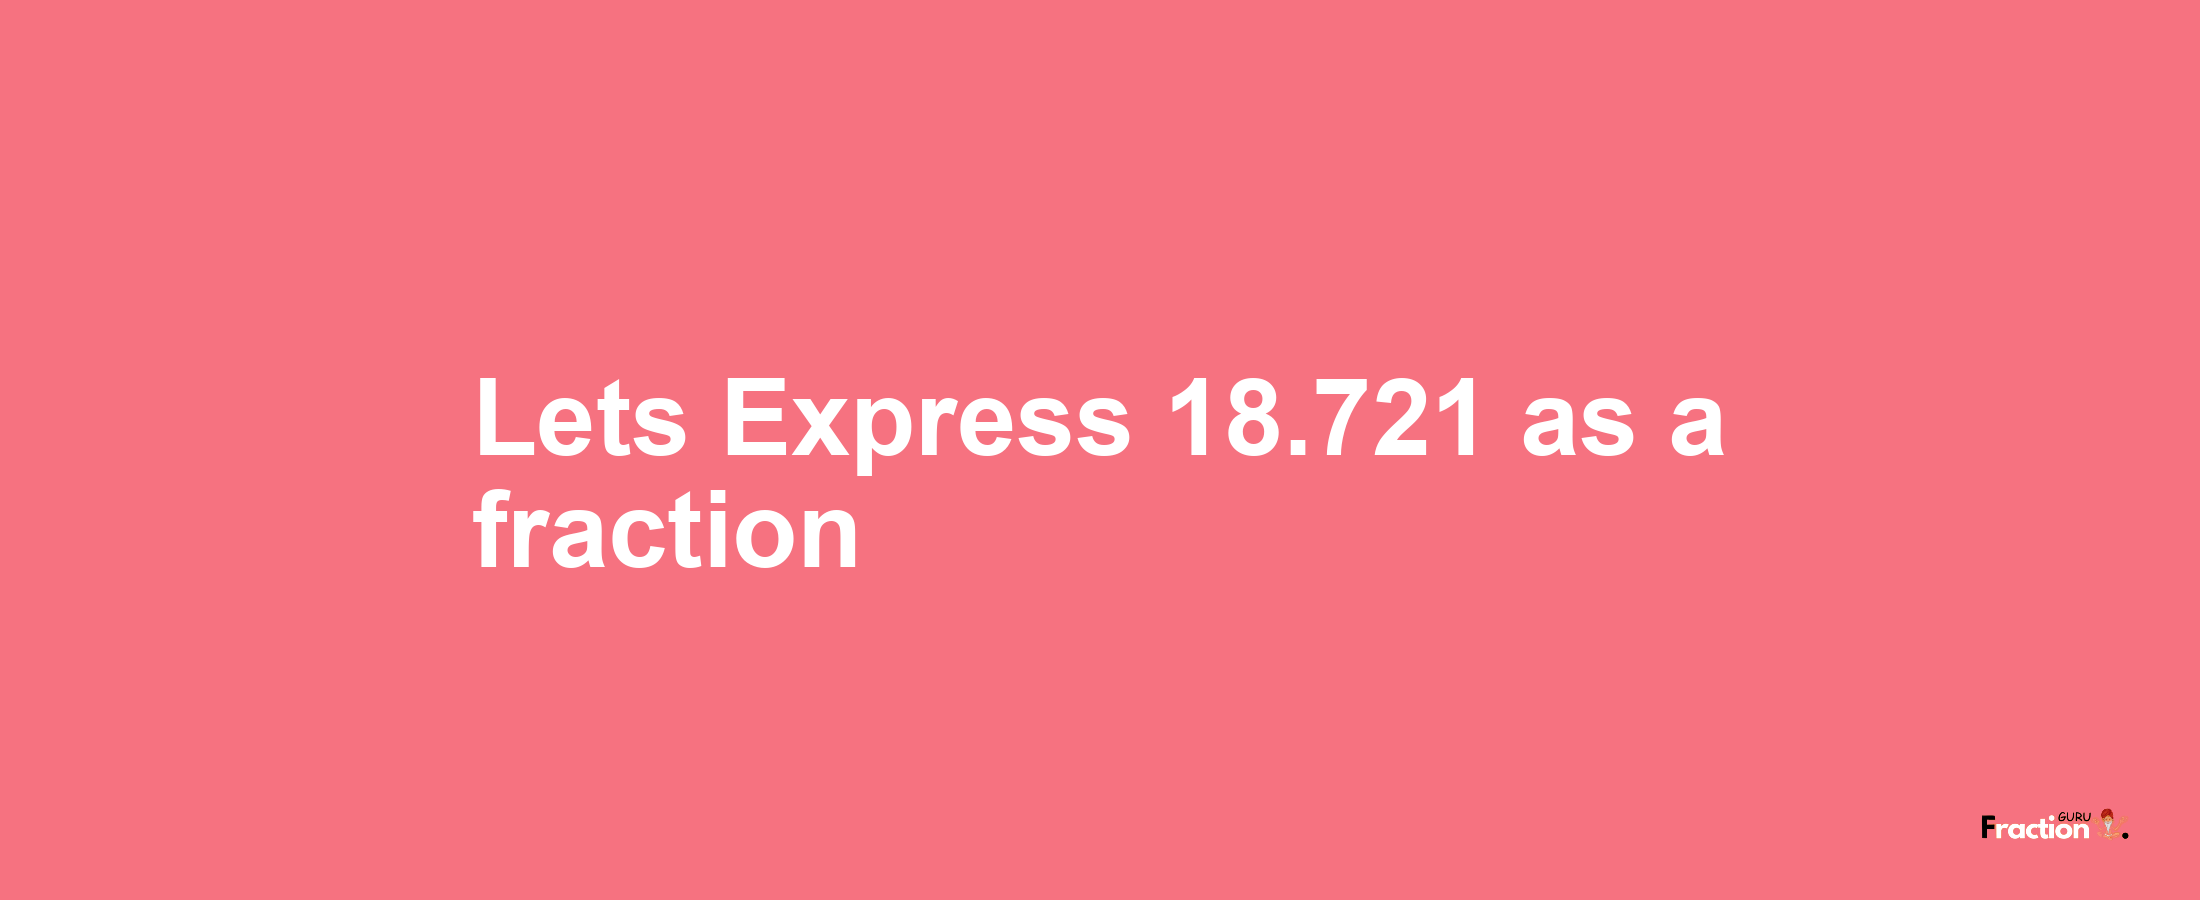 Lets Express 18.721 as afraction